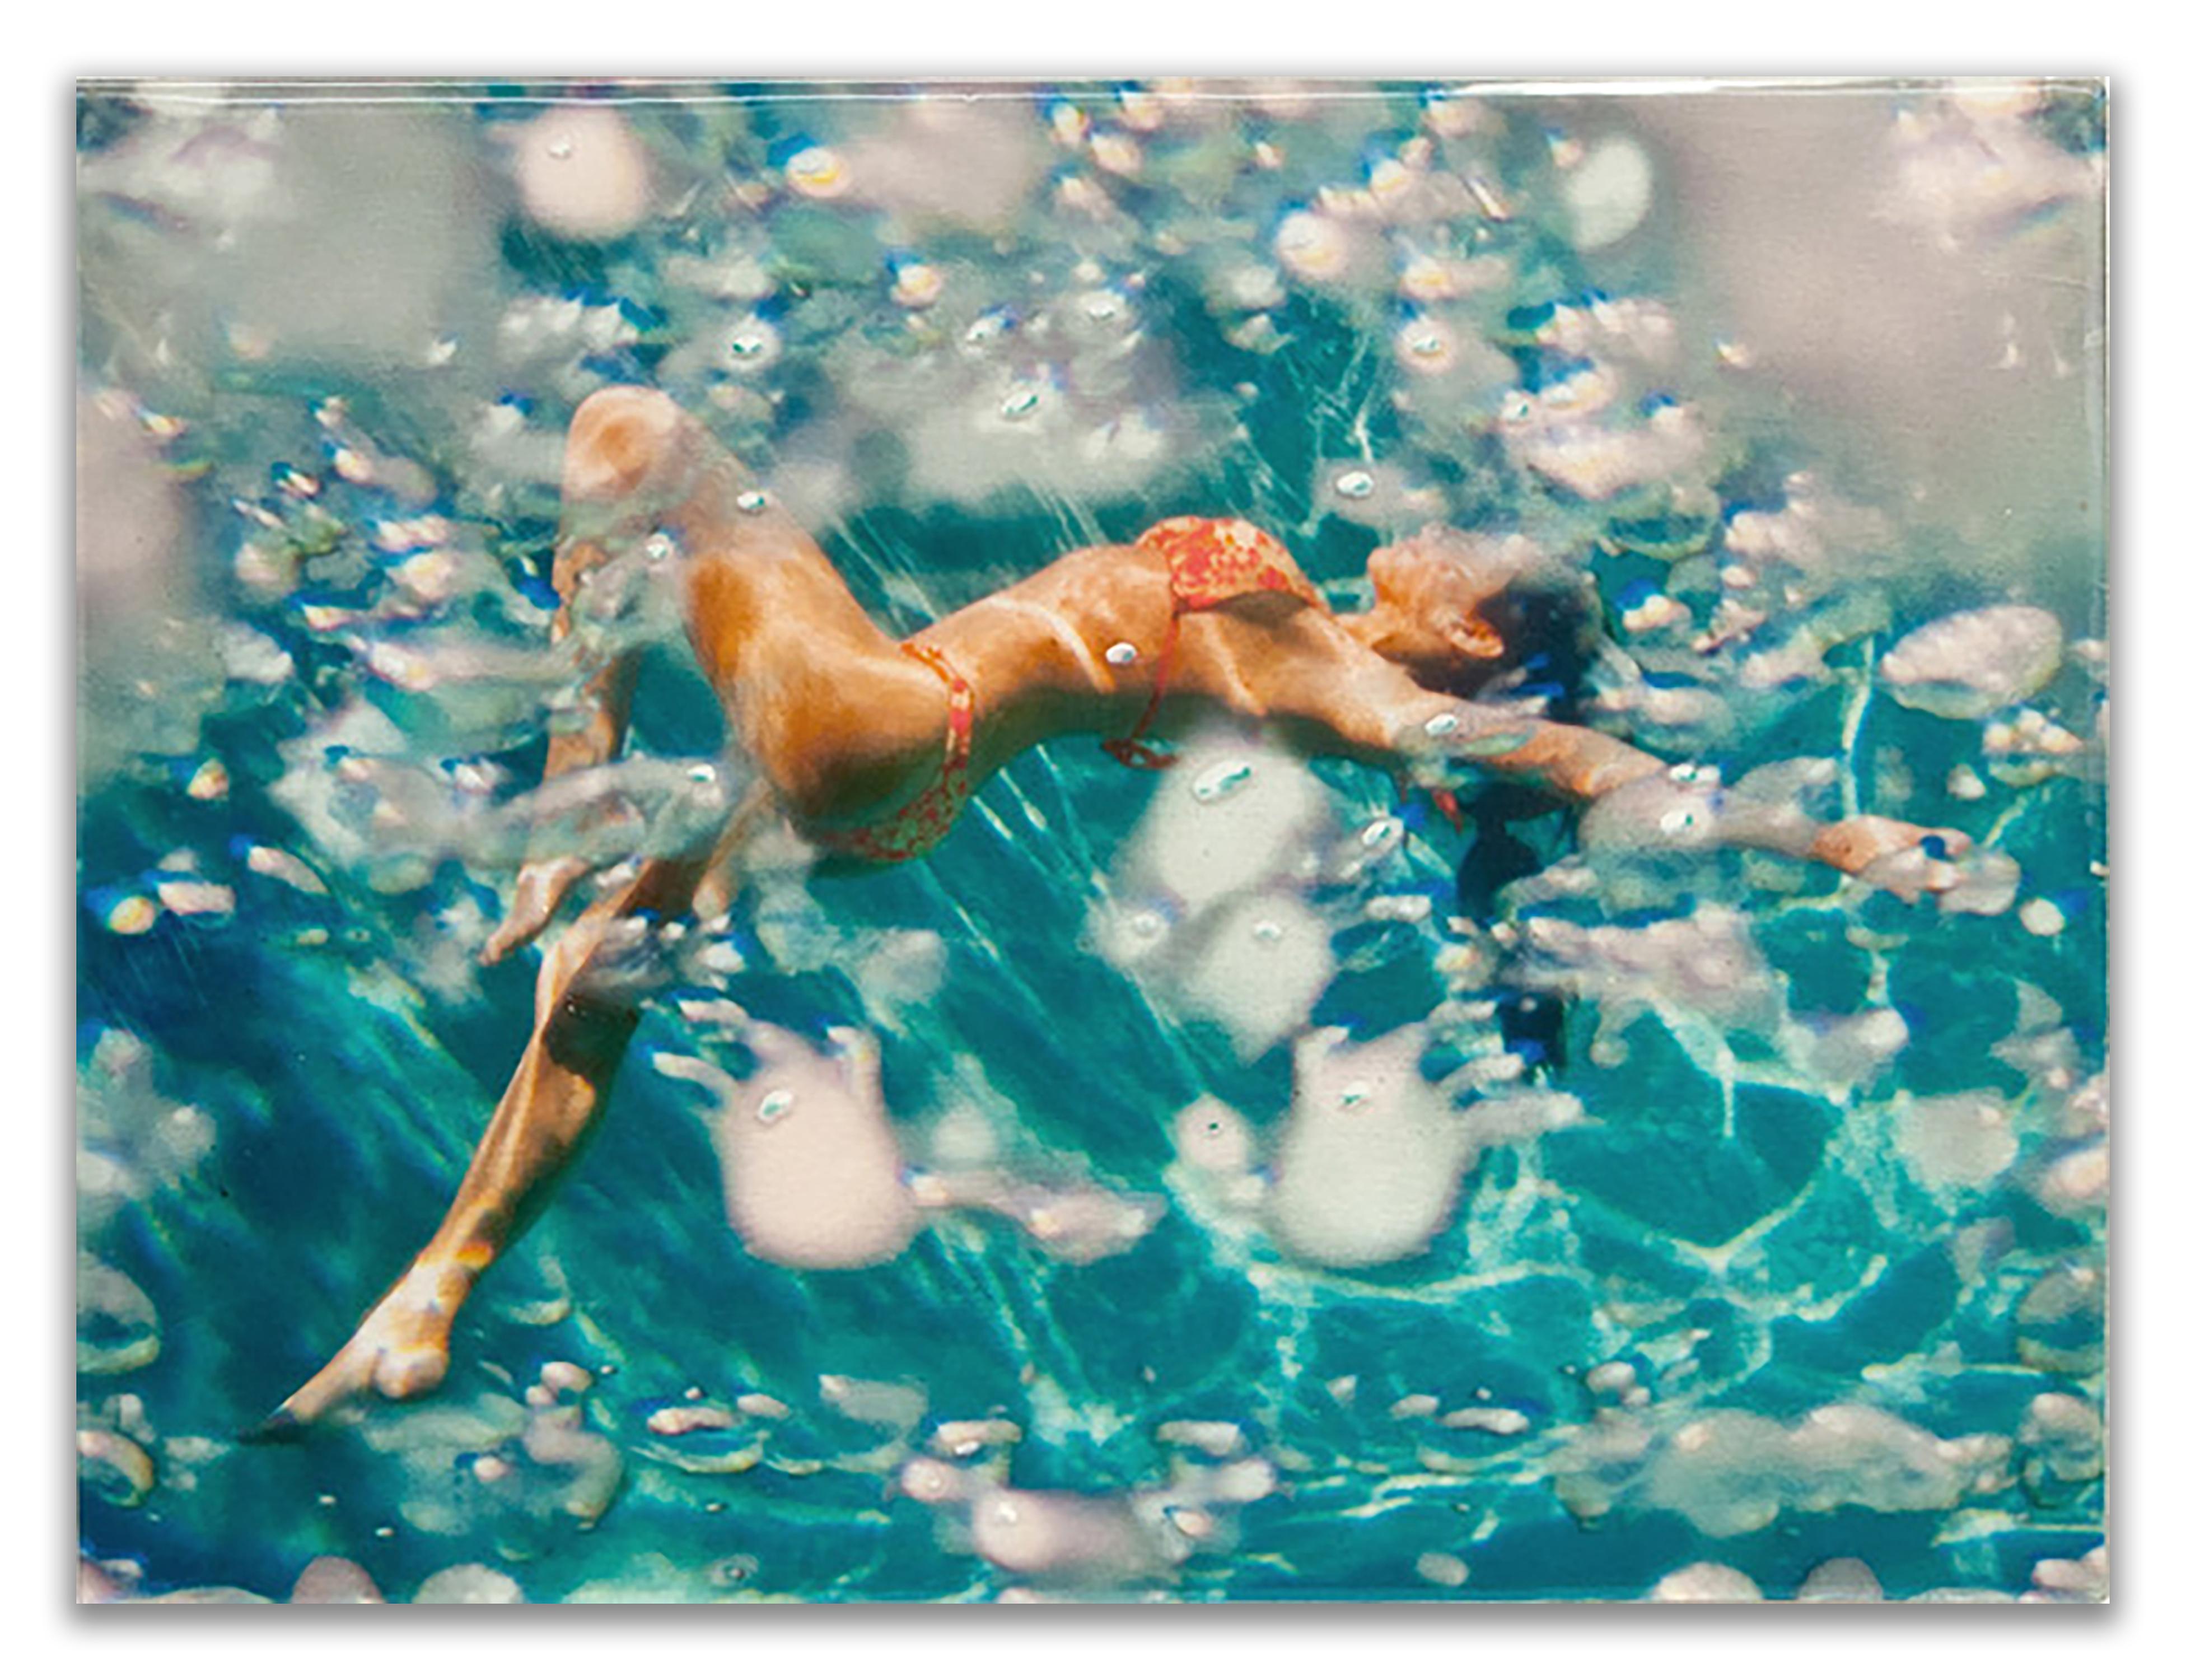 "Joy" 
18 x 24 inches
Unique

Photo transparency with resin, paint and silver or gold leaf, on a wood panel. 

Eric Zener (b. 1966) is a self-taught photorealist artist recognized for his figure paintings of lone subjects often submerged in swimming